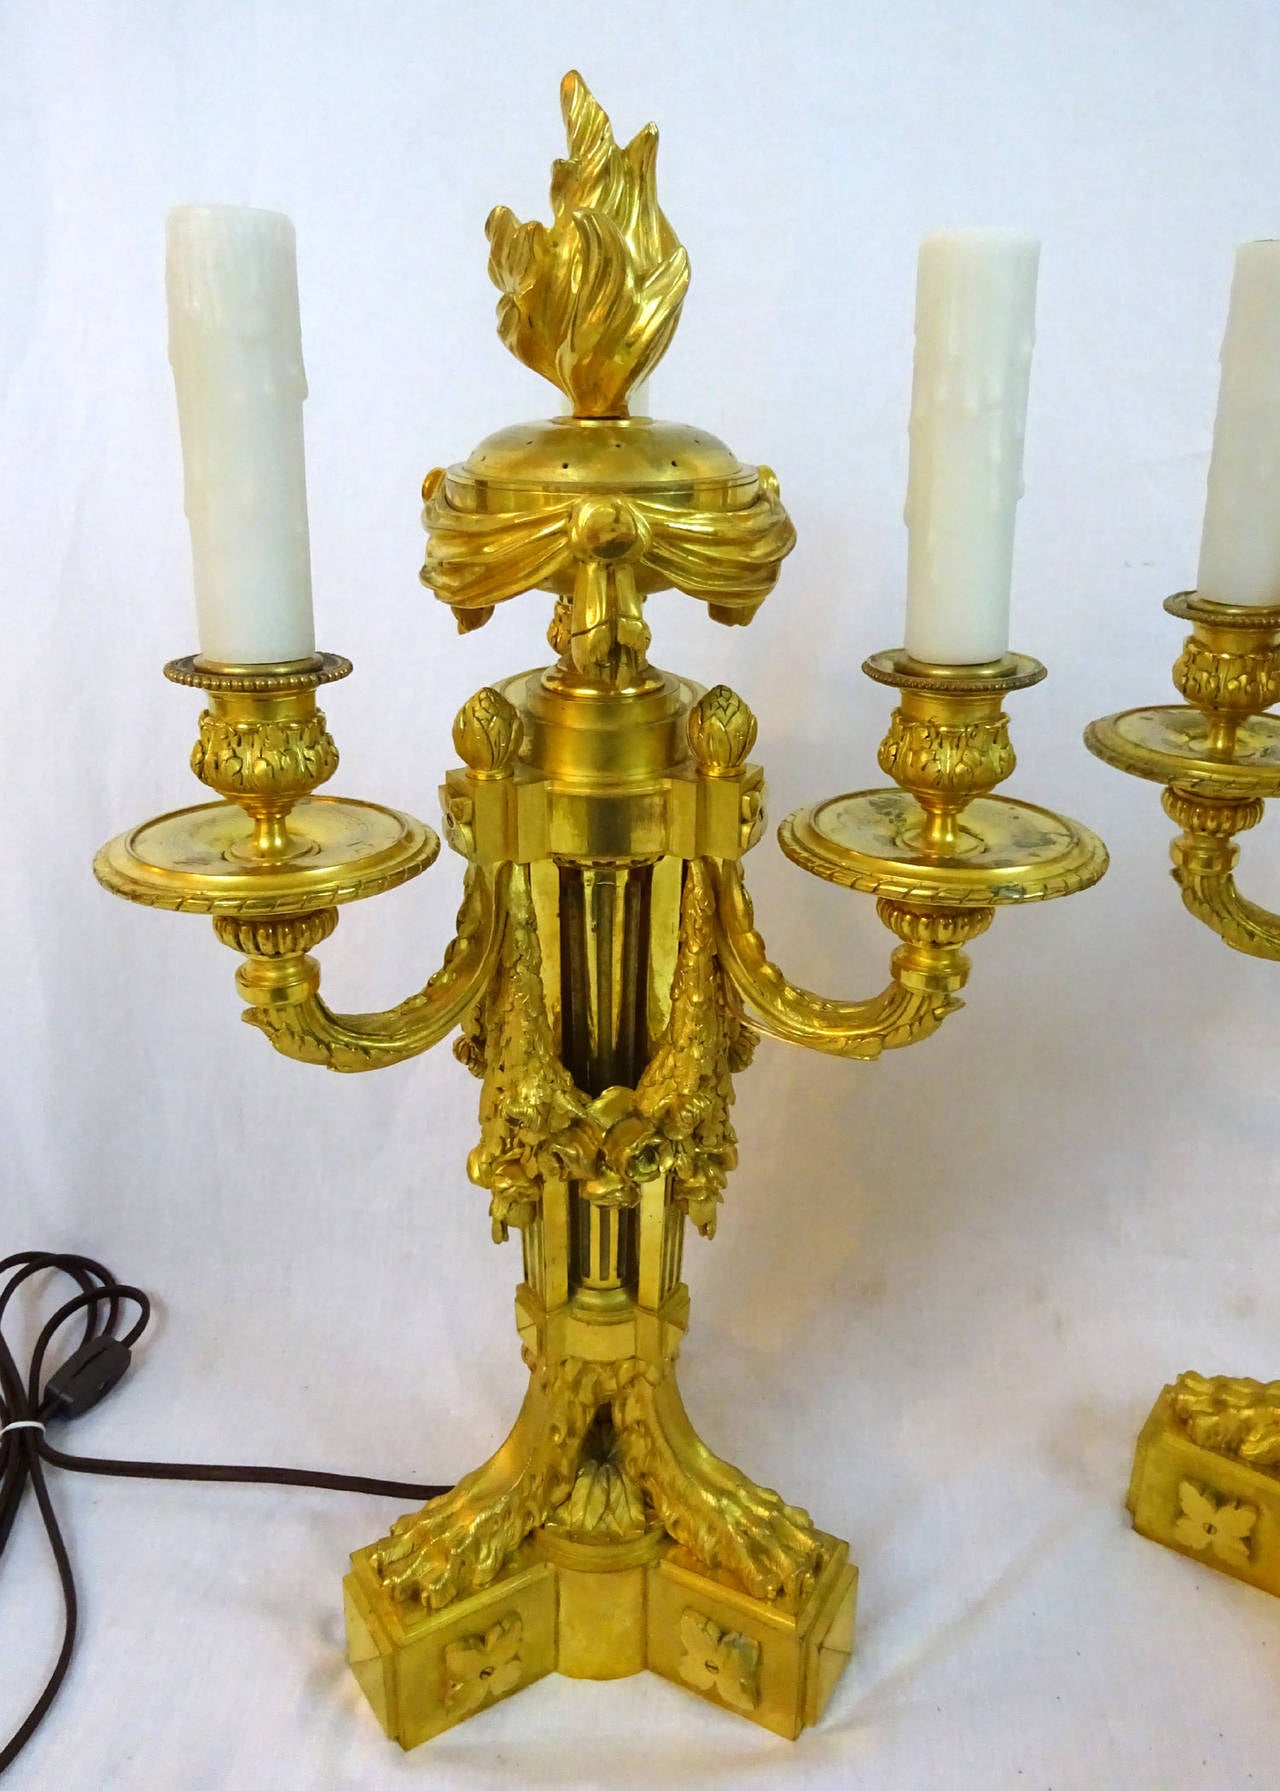 Pair of very fine Louis XVI style gilt bronze Ormolu three-light candelabra now as lamps with central perfumier topped by a flame shaped lid.